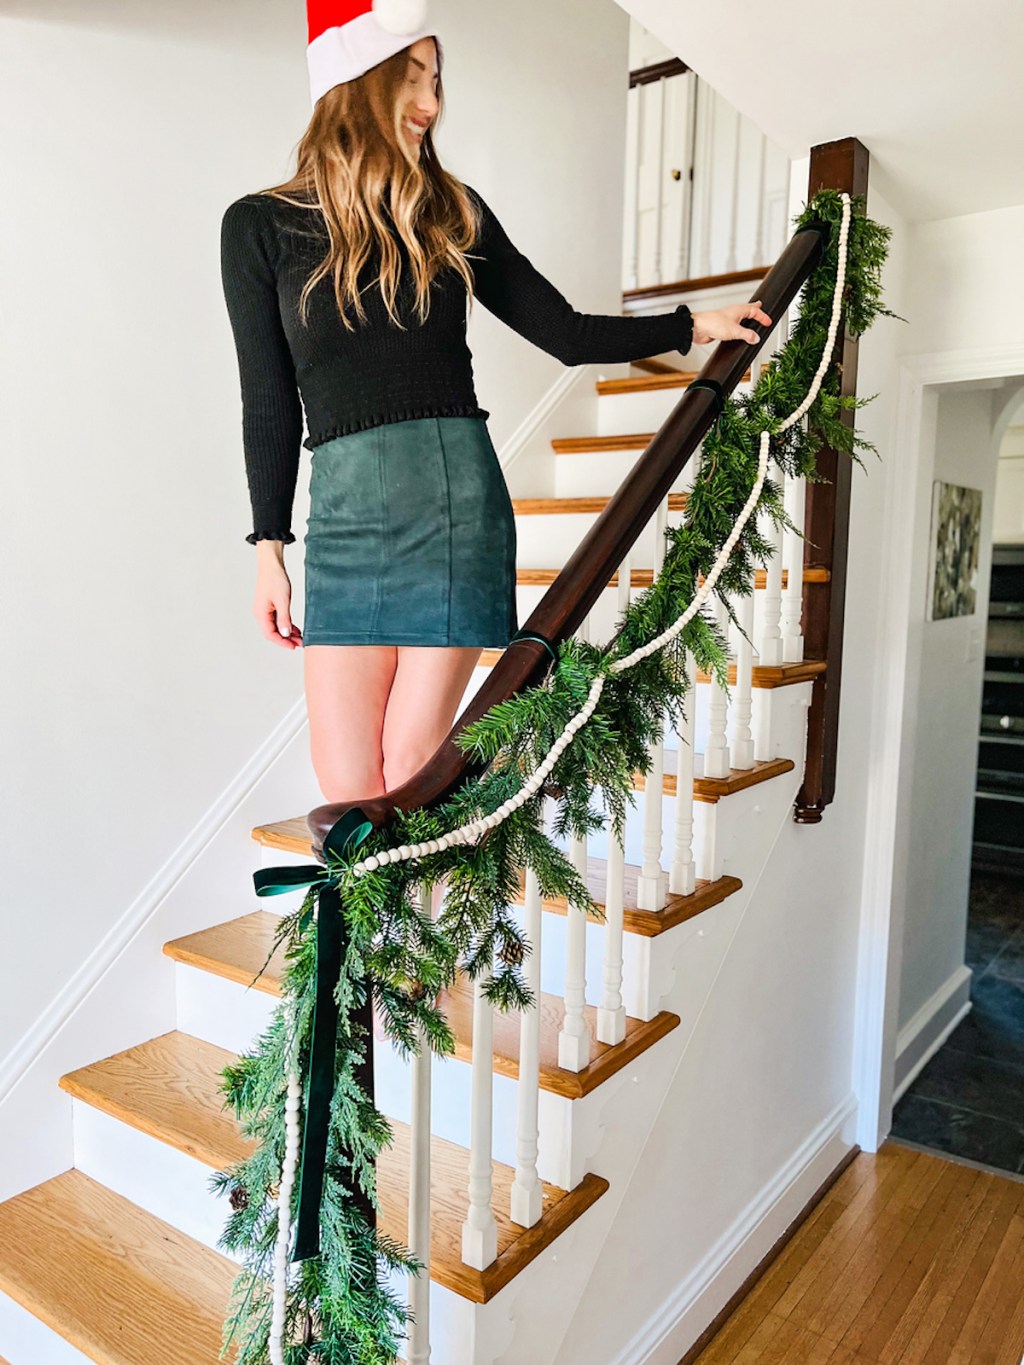 woman standing on staircase holding onto decorated railing with garland